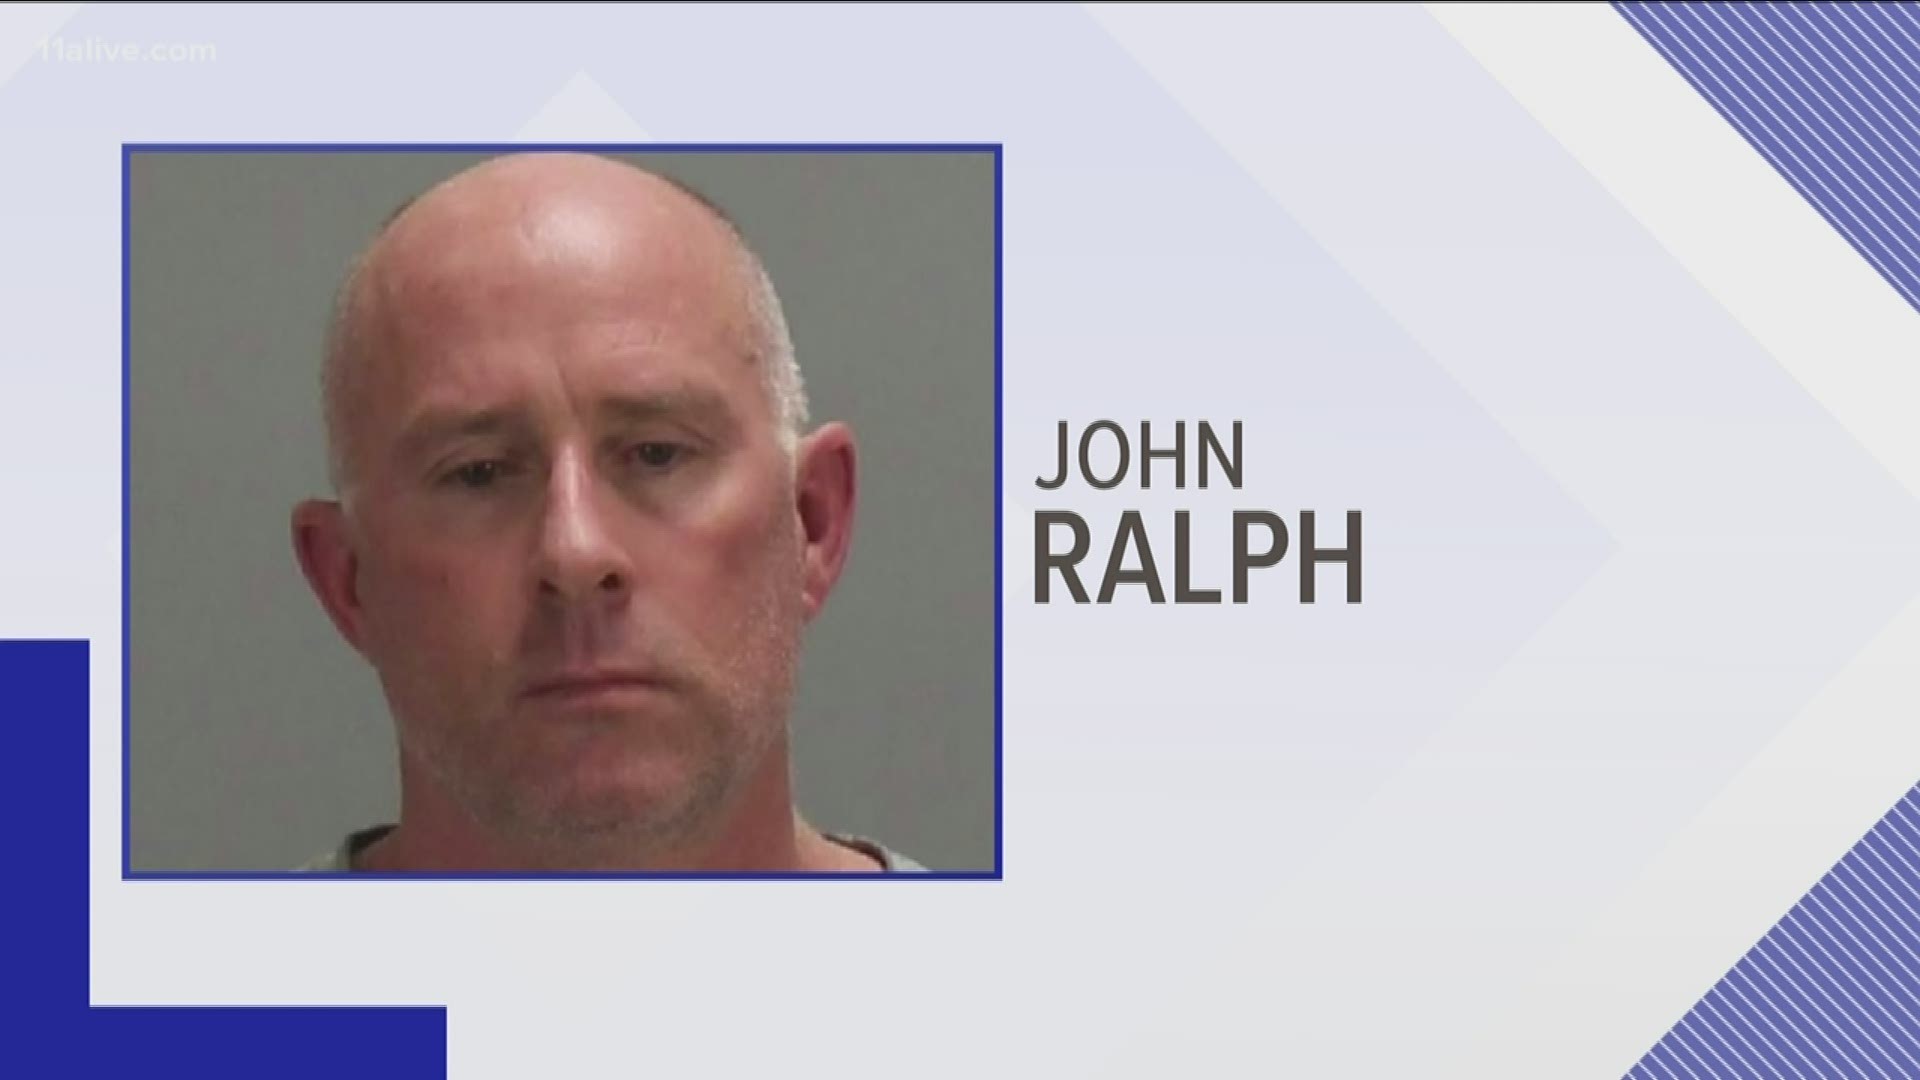 John Ralph reportedly asked co-workers to take pictures of him at work, saying that if anything happened to his mother, he would need an alibi.